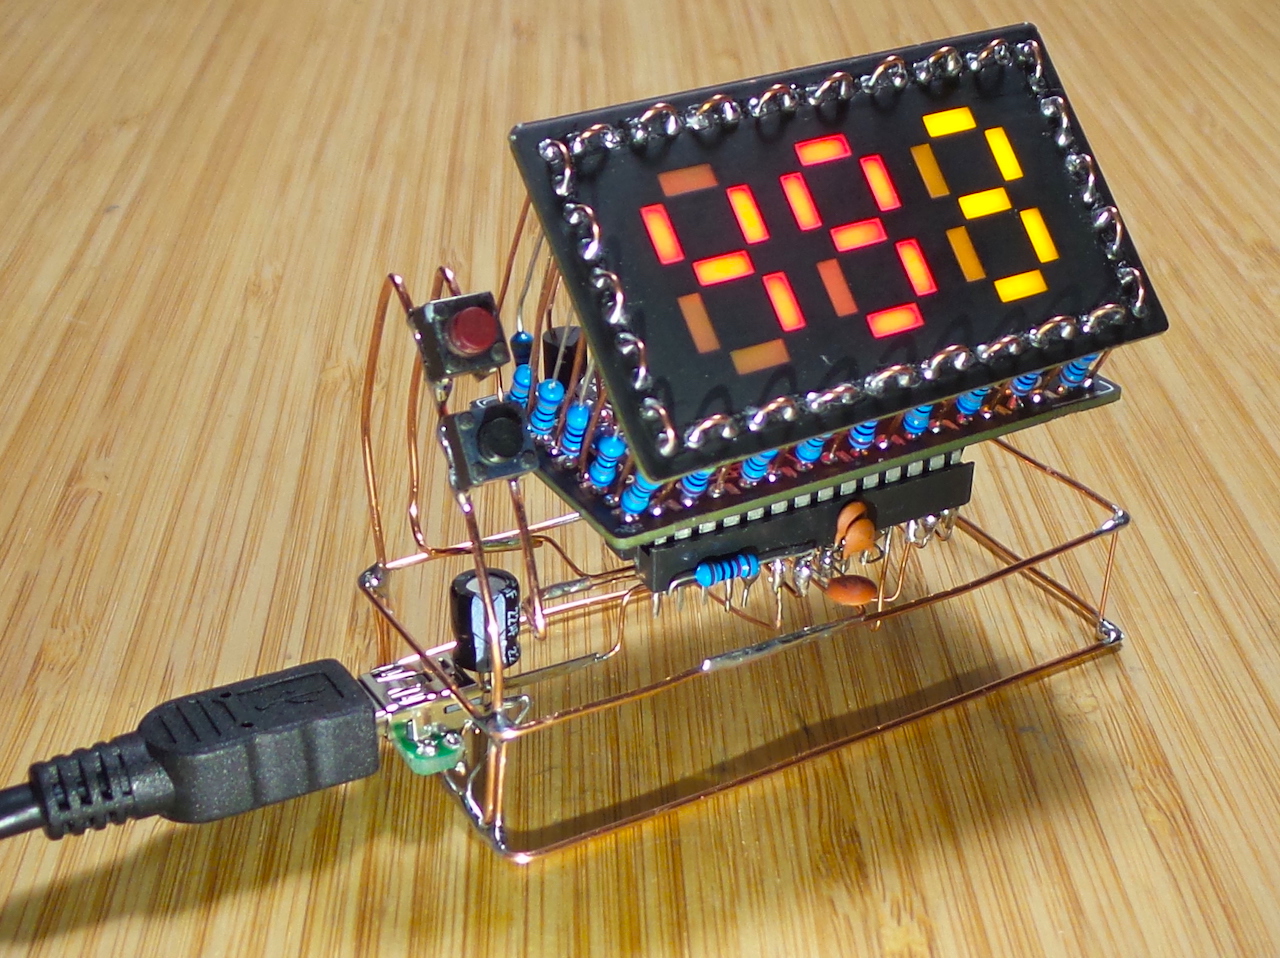 My new Pomodoro Timer - a #BoldportClub 3x7 wire sculpture inspired by the amazing work of @MohitBhoite LEAP#429